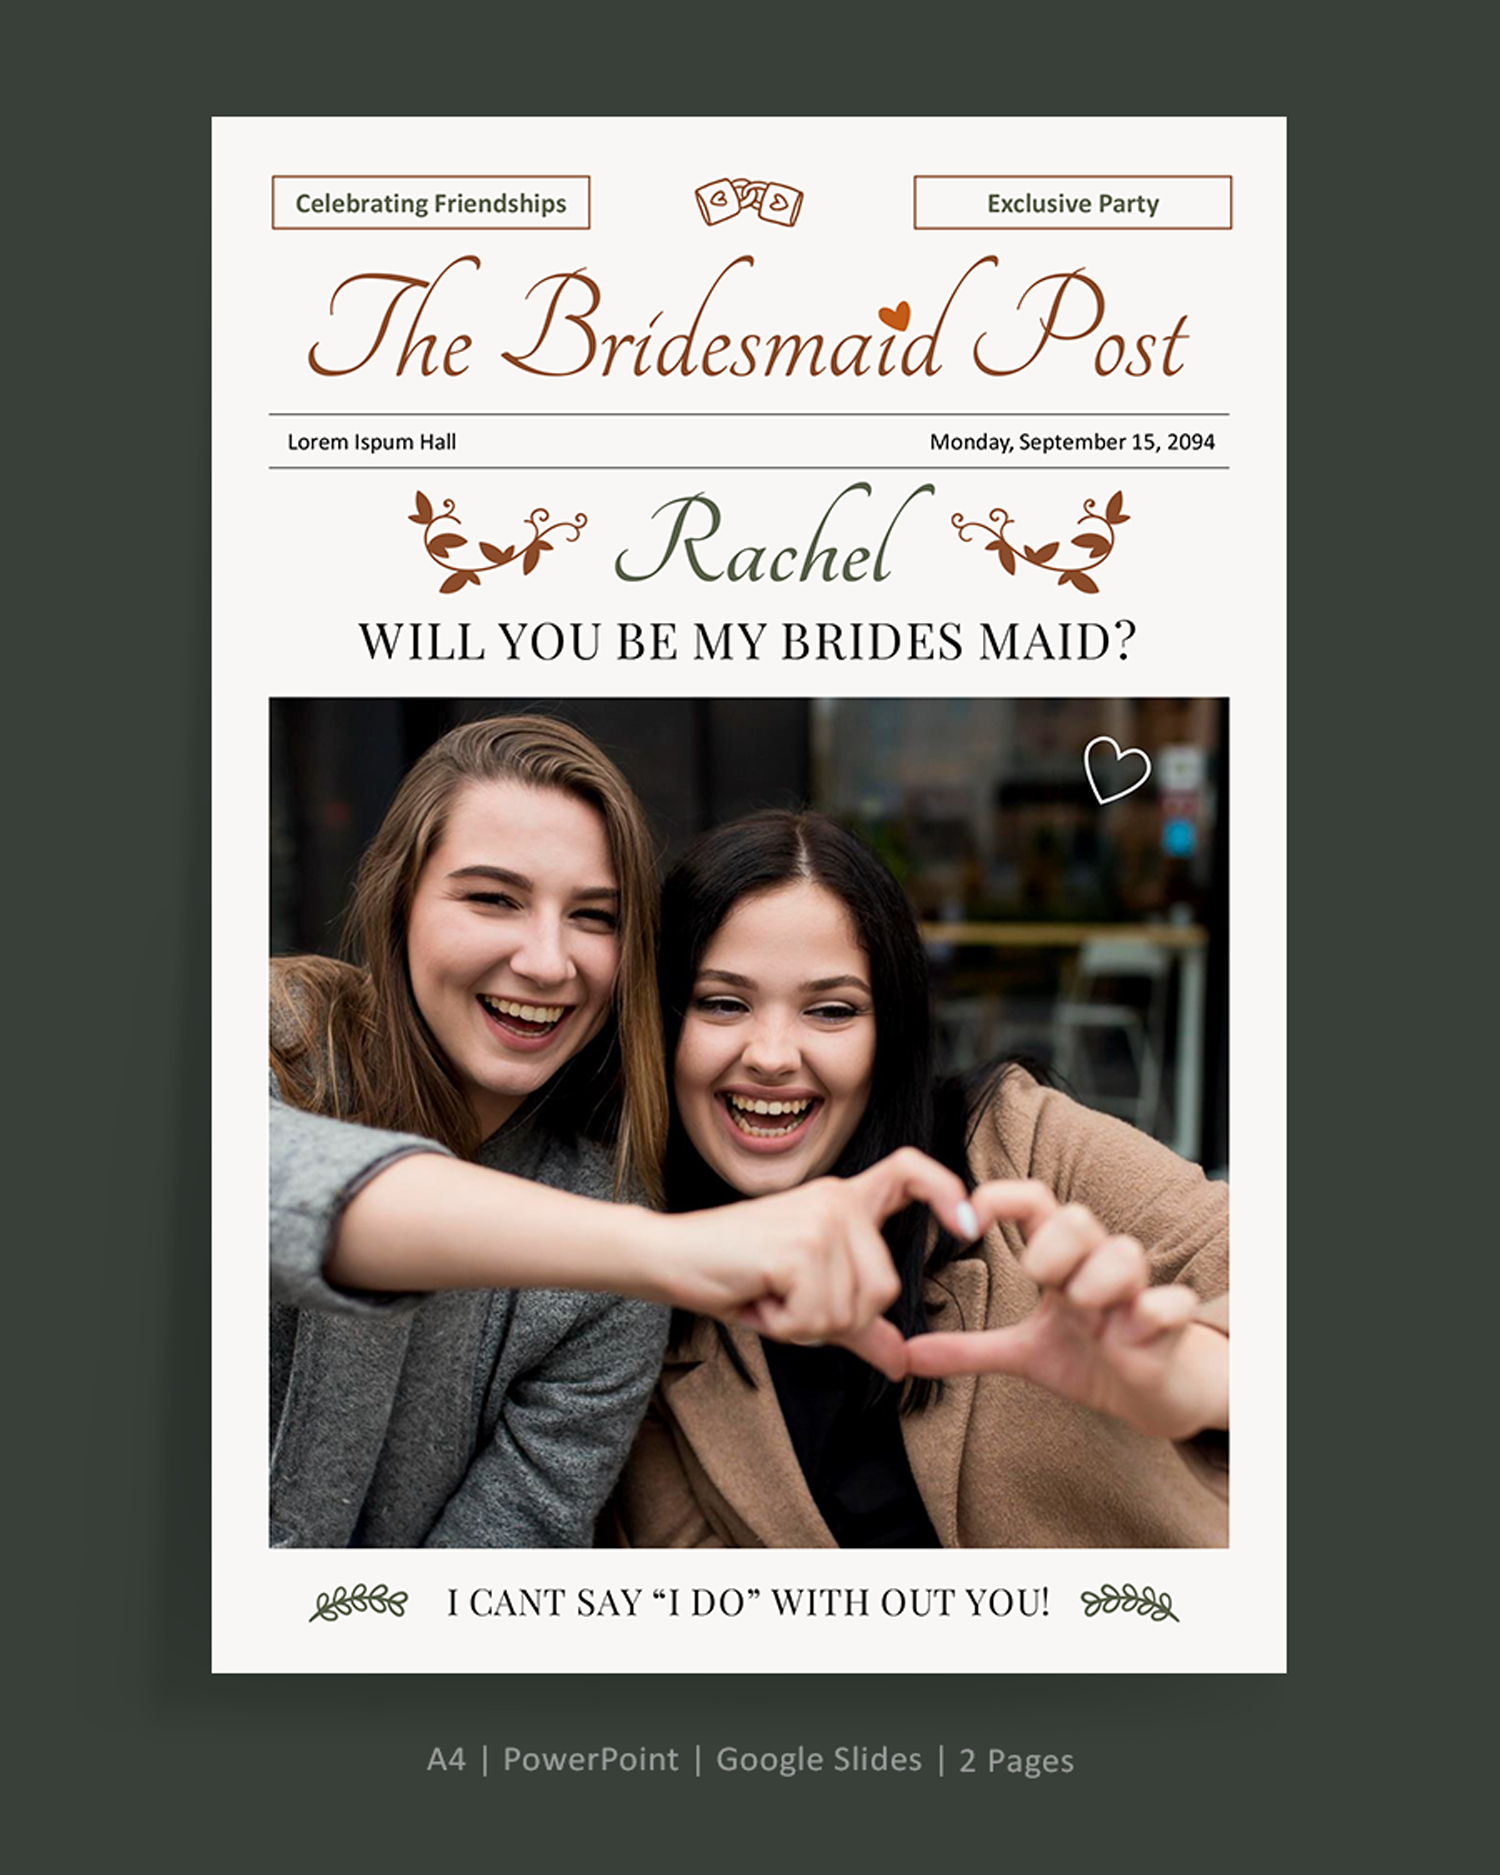 Maid of Honor Proposal Newspaper Template - PowerPoint, Google Slides